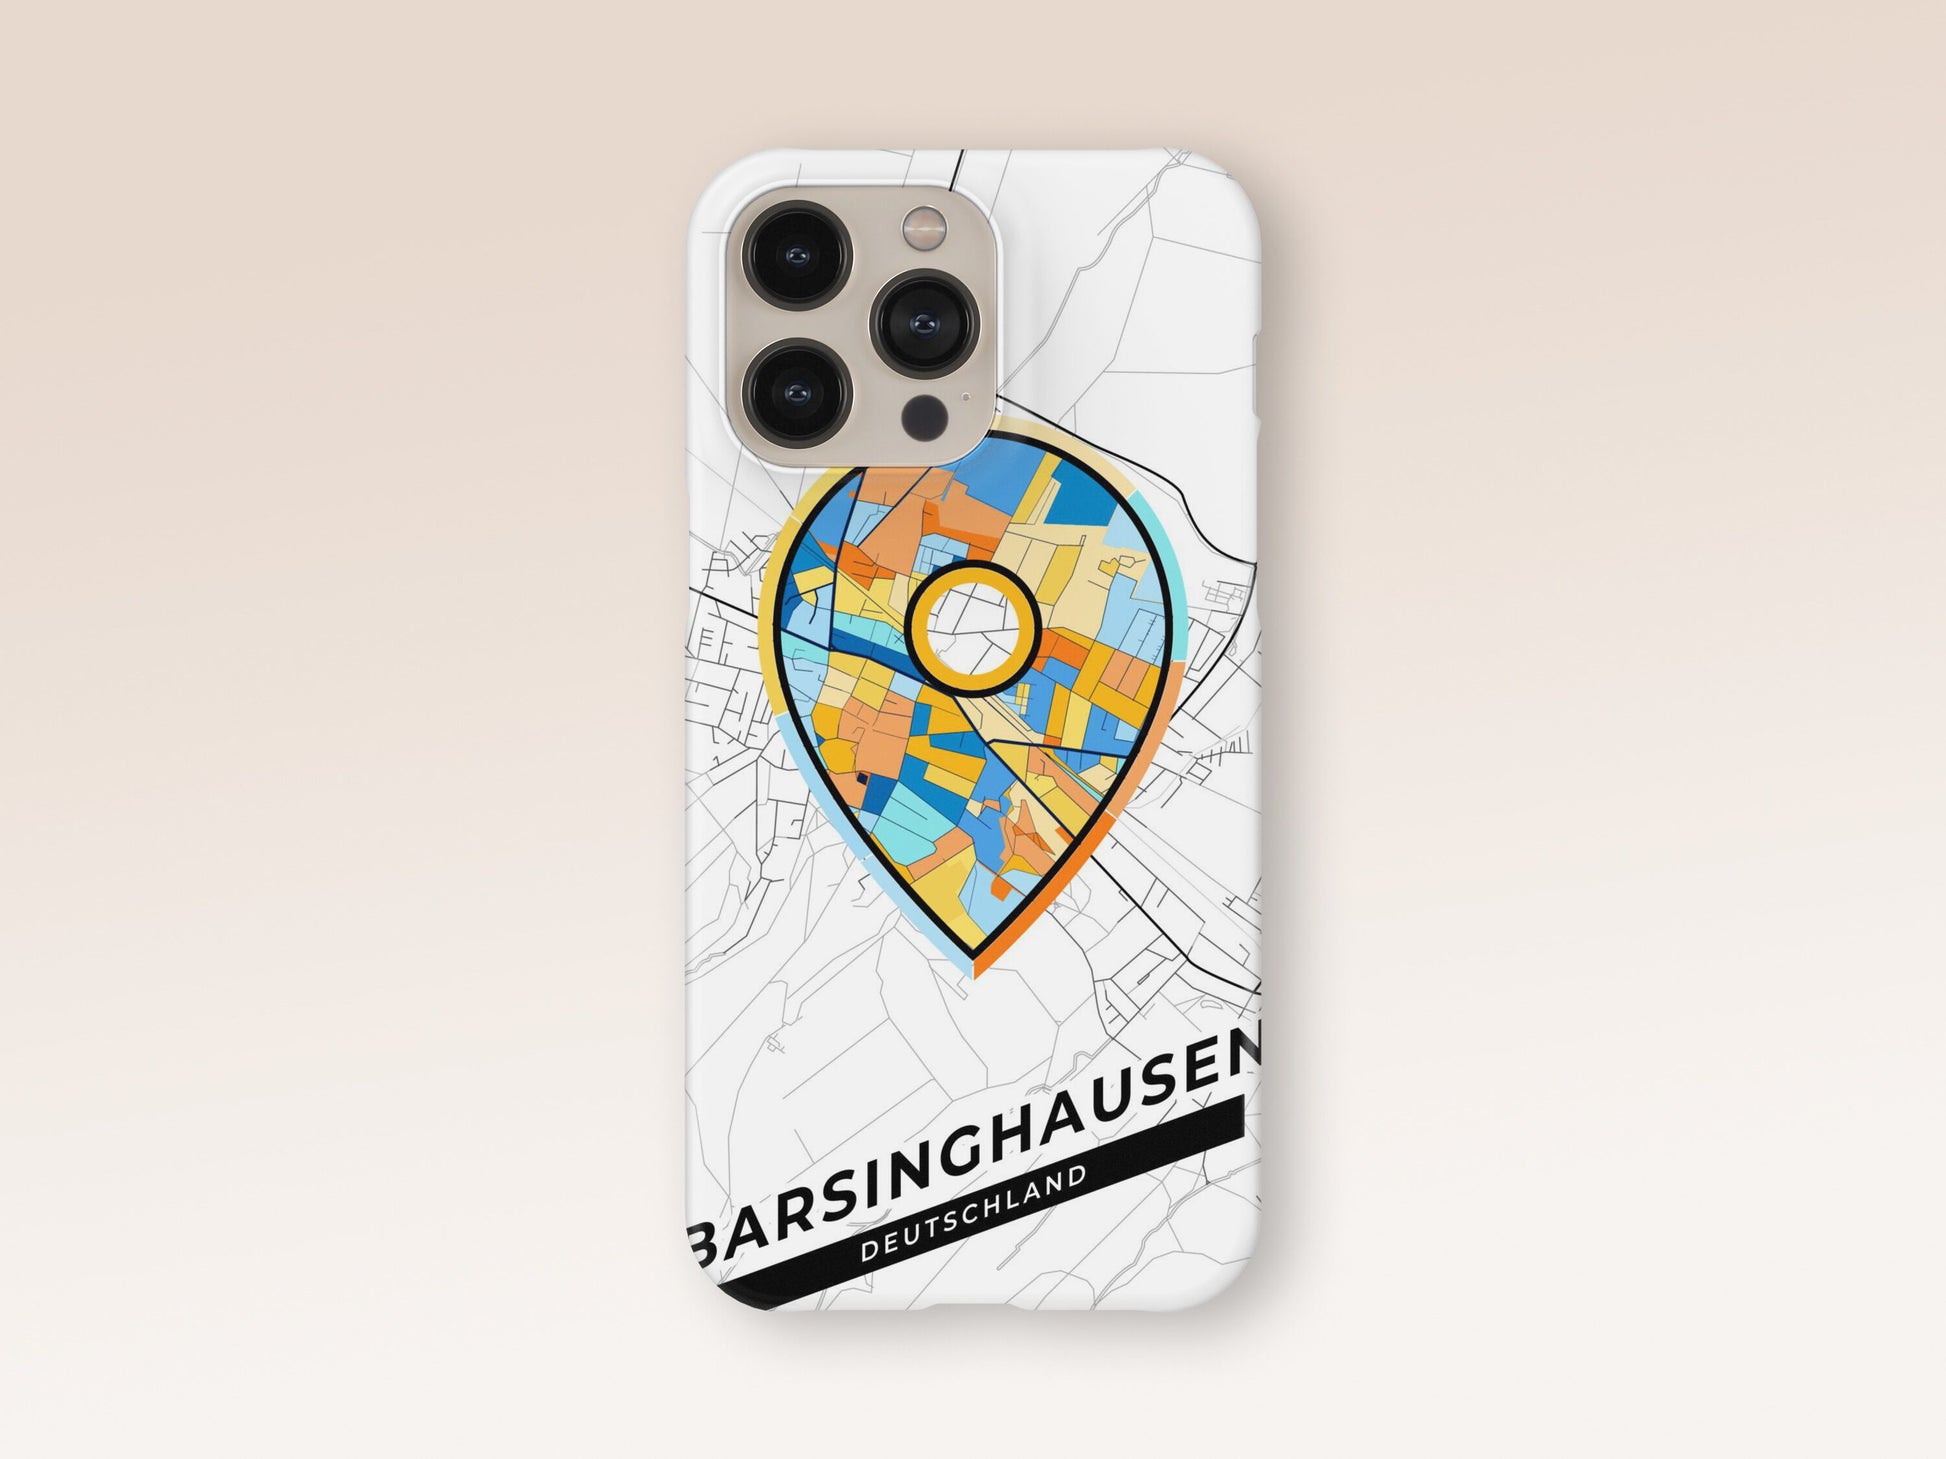 Barsinghausen Deutschland slim phone case with colorful icon. Birthday, wedding or housewarming gift. Couple match cases. 1